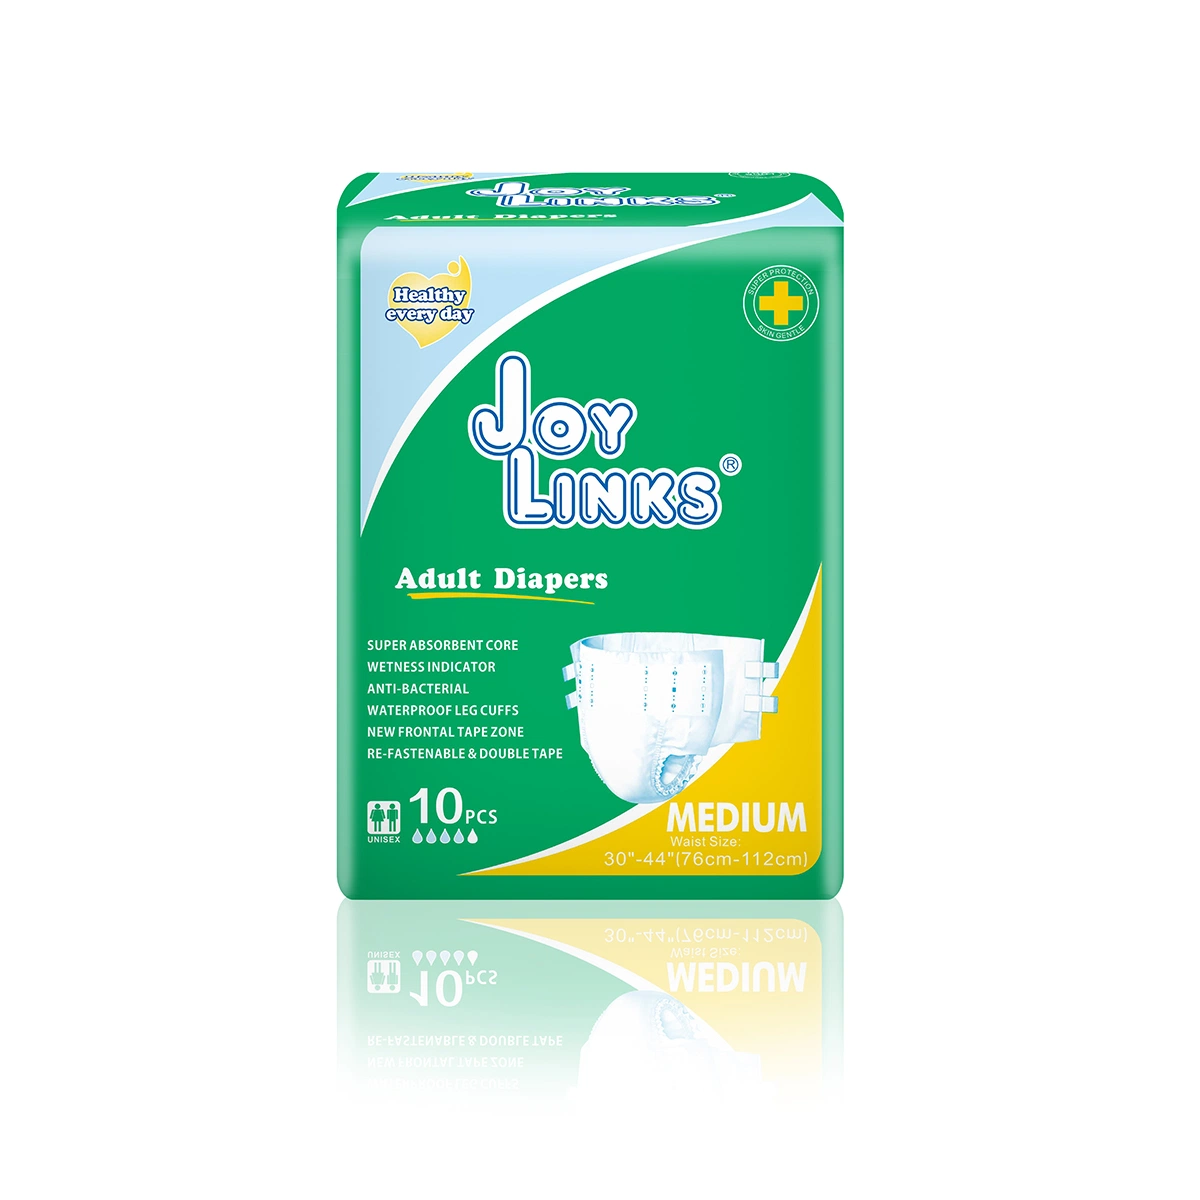 Cheep Adult Daily Used Adult Diapers for Old People for Hospital